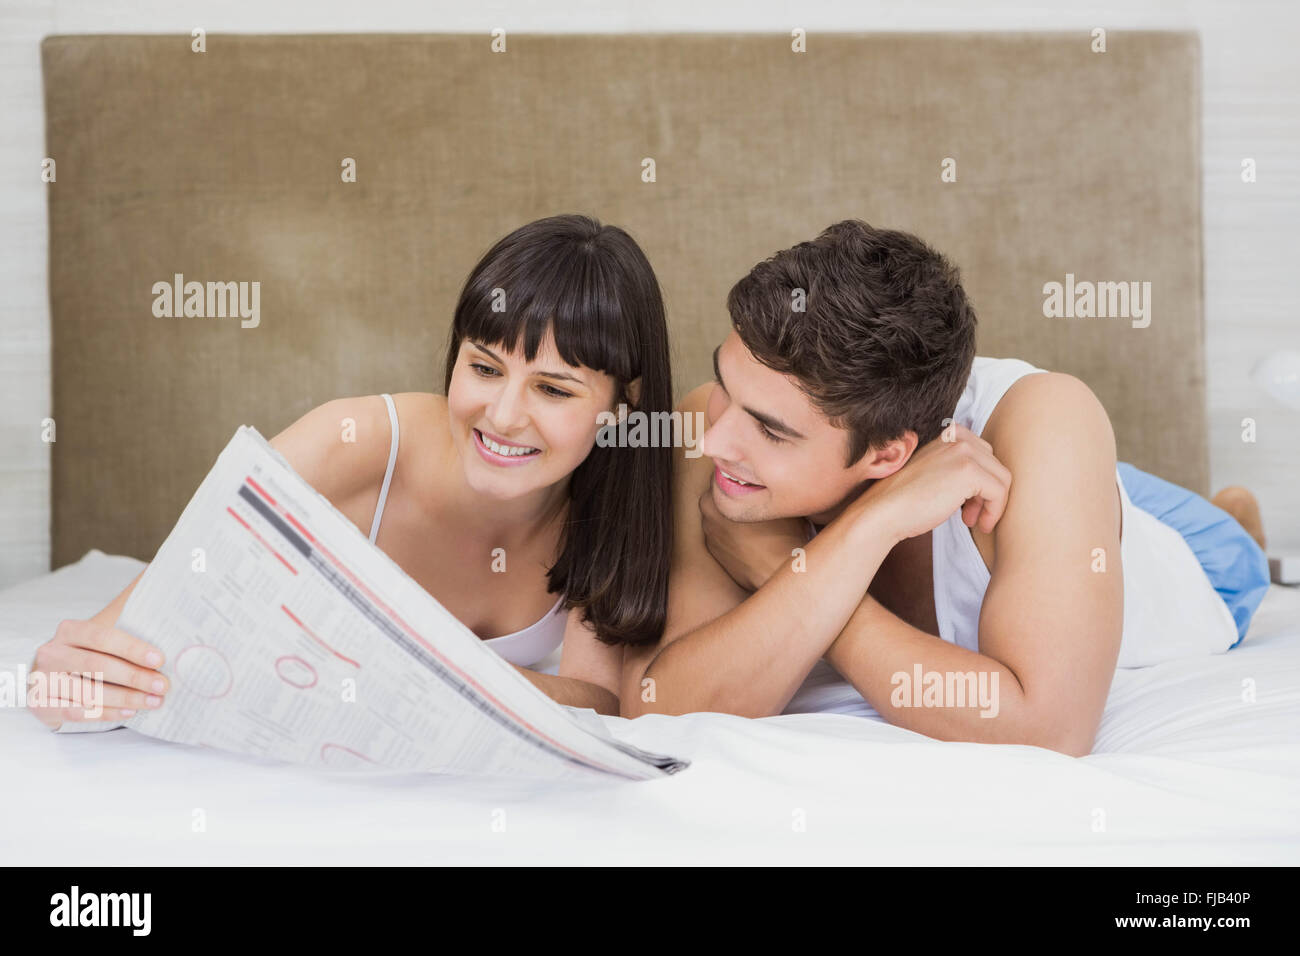 Couple reading newspaper on bed Banque D'Images